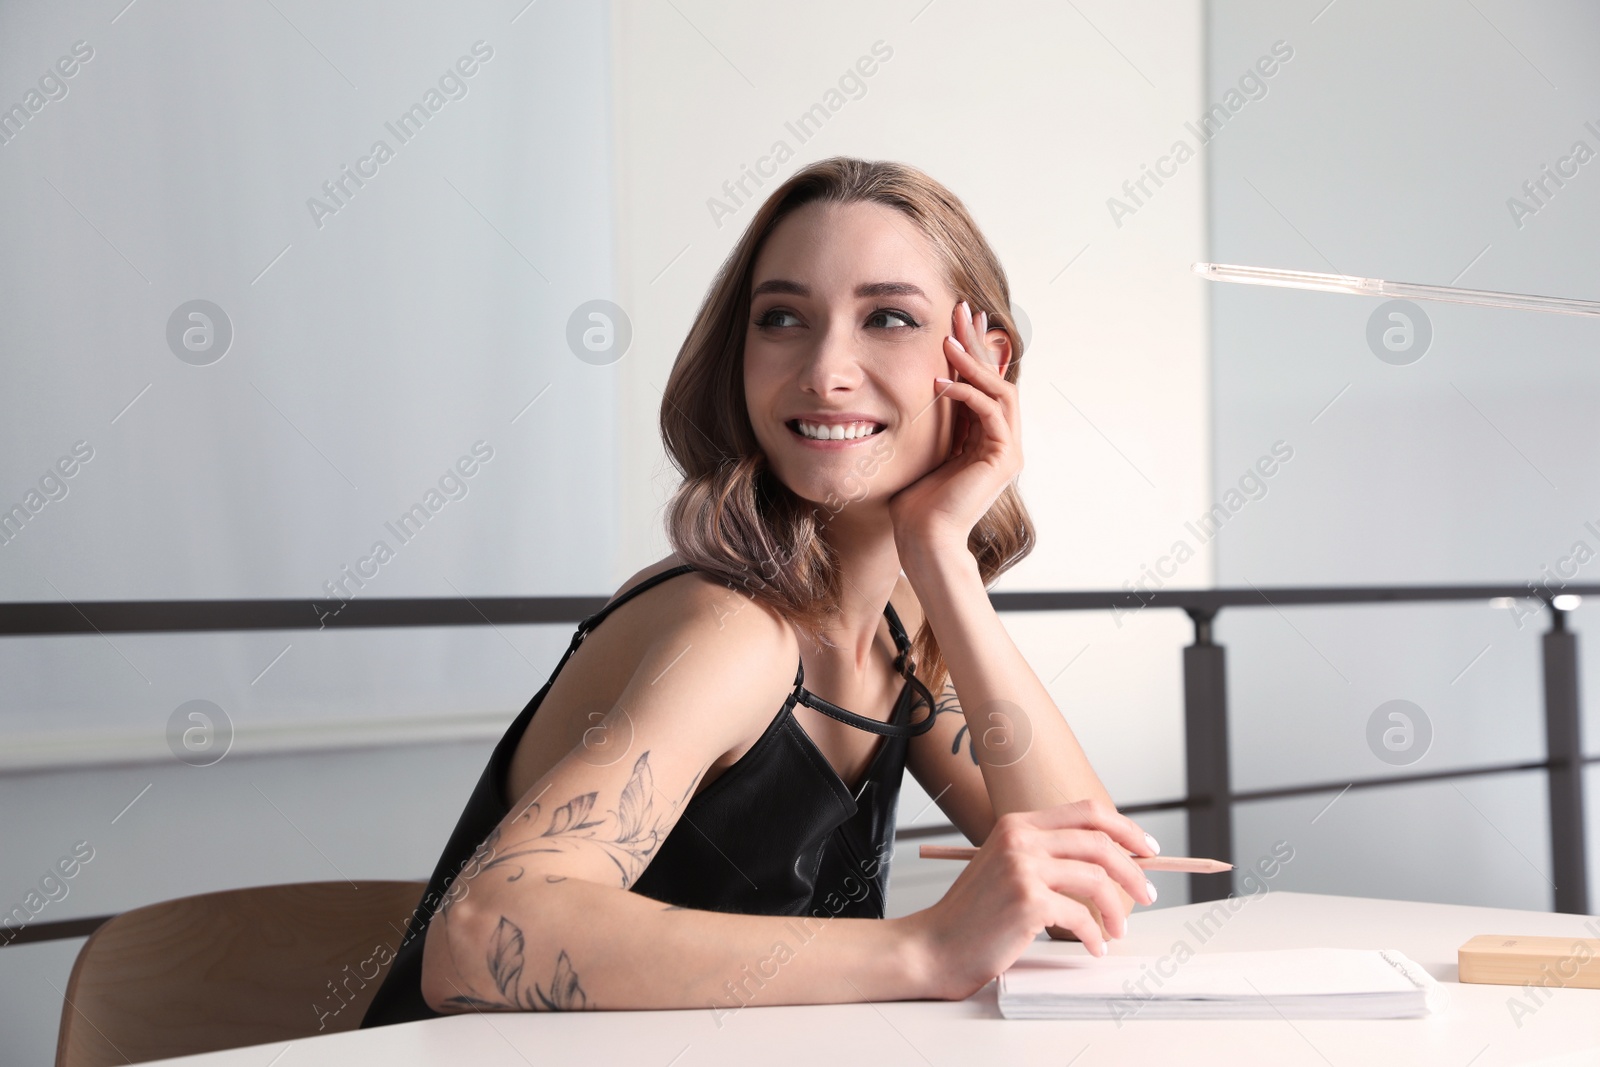 Photo of Beautiful woman with tattoos on body drawing in sketchbook at table indoors